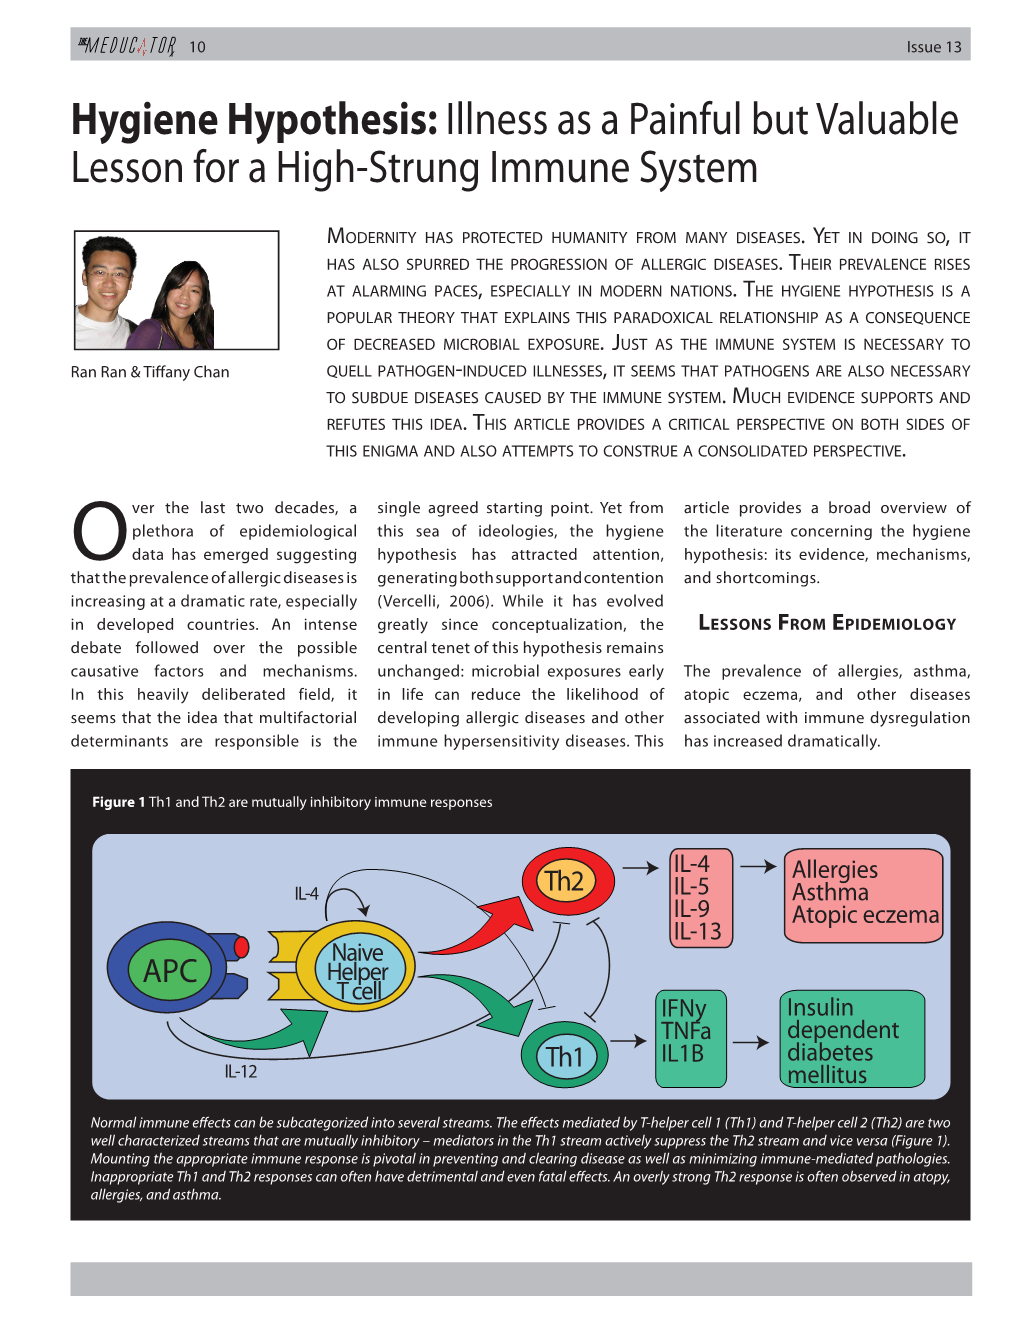 Hygiene Hypothesis: Illness As a Painful but Valuable Lesson for a High-Strung Immune System